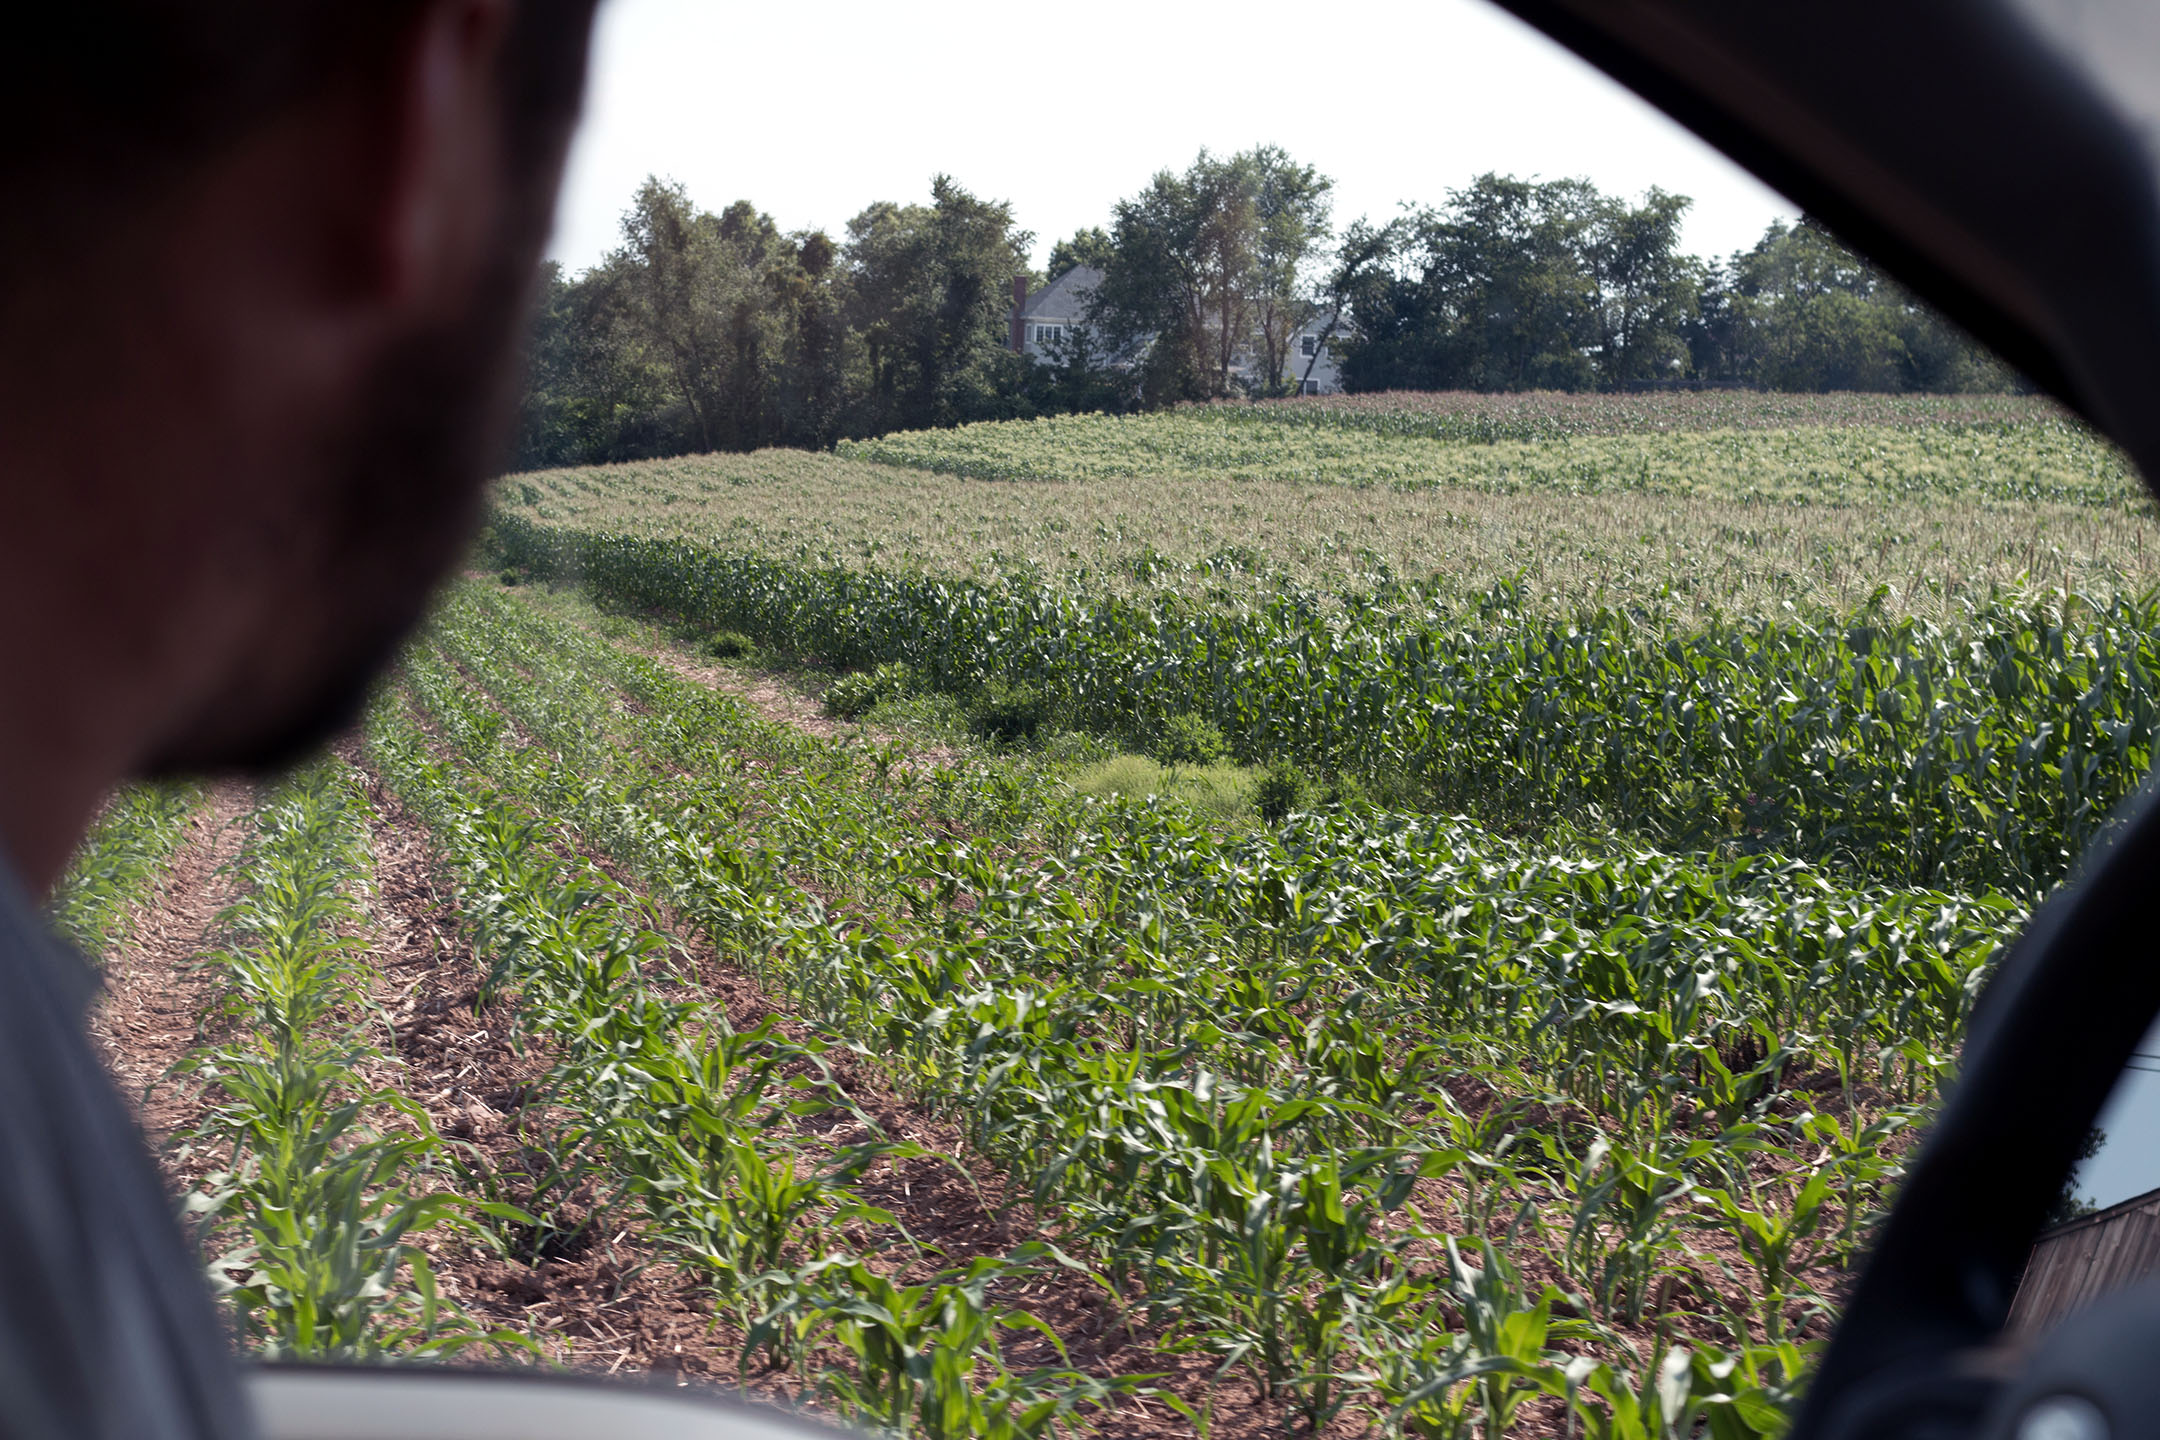 William DellaCamera drives by the corn fields on July 13th, 2018.